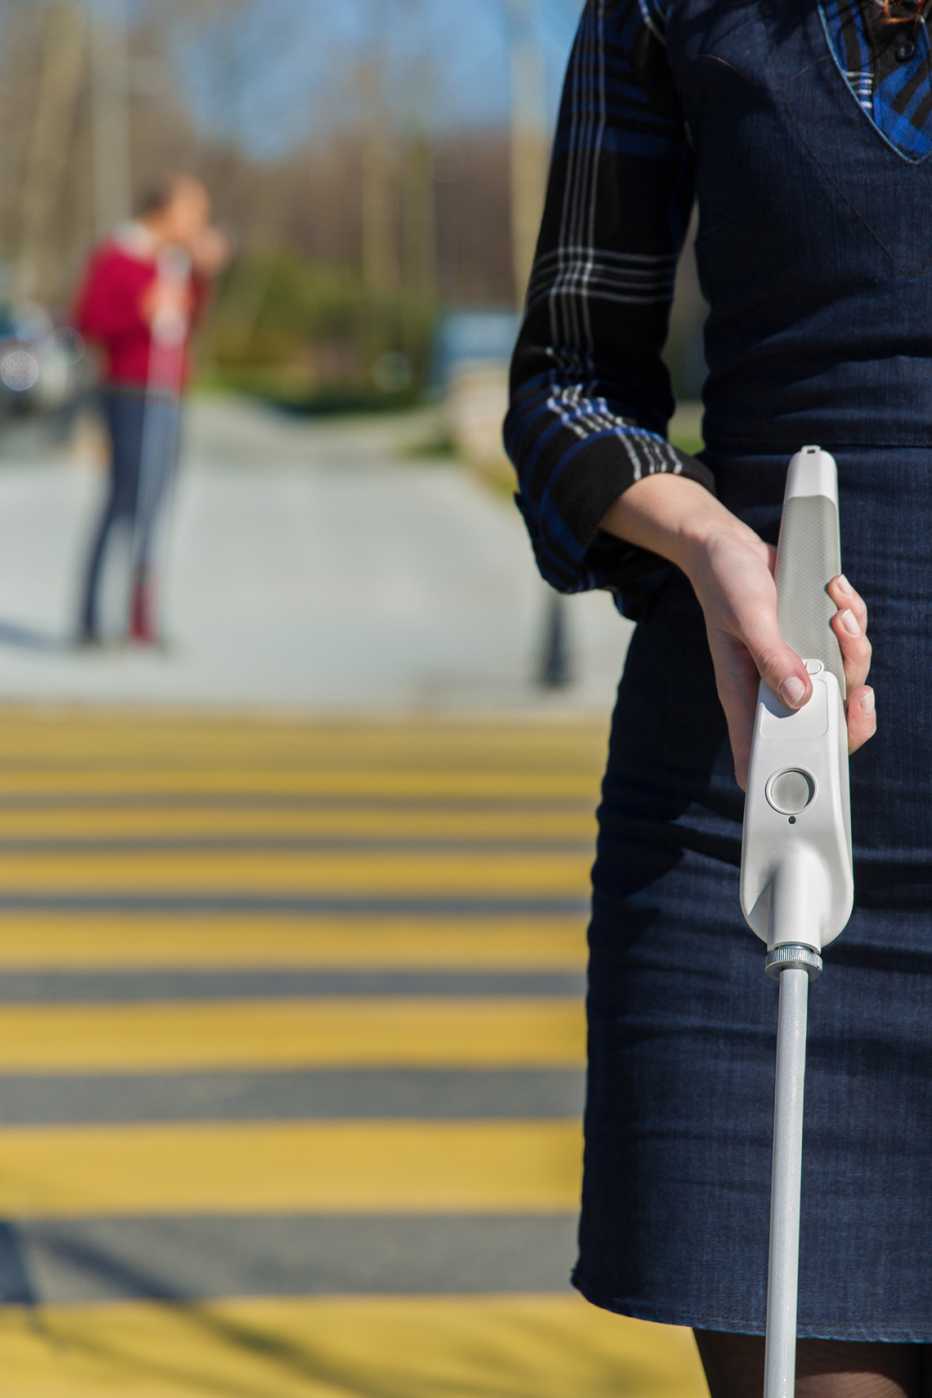 Wewalk cane, an assistive device for blind and low vision people